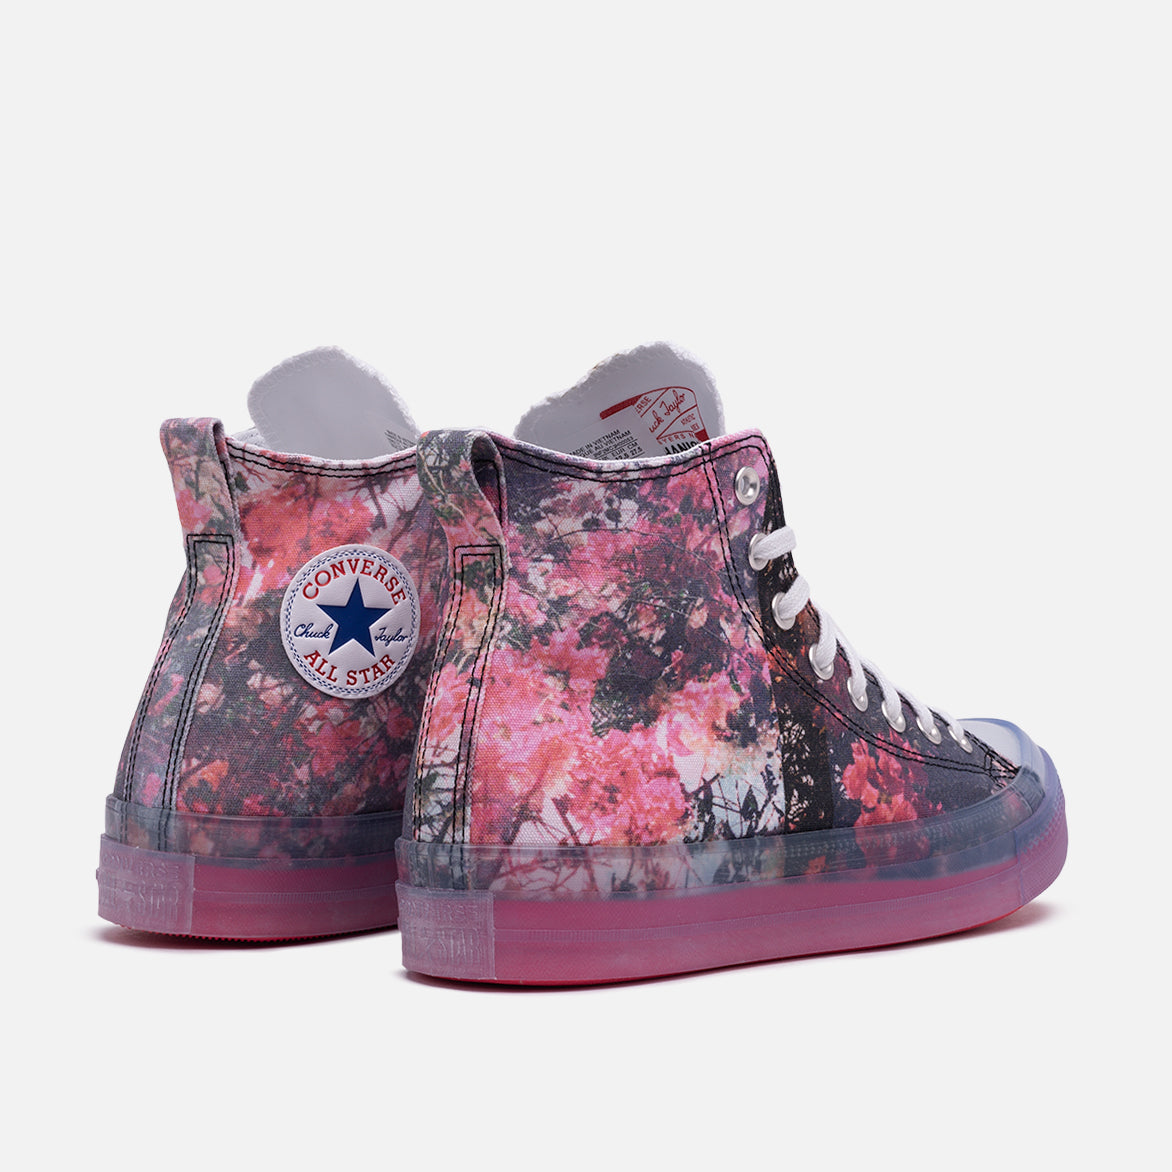 SHANIQWA JARVIS X CONVERSE CHUCK TAYLOR CX - TEABERRY / WHITE / BLACK